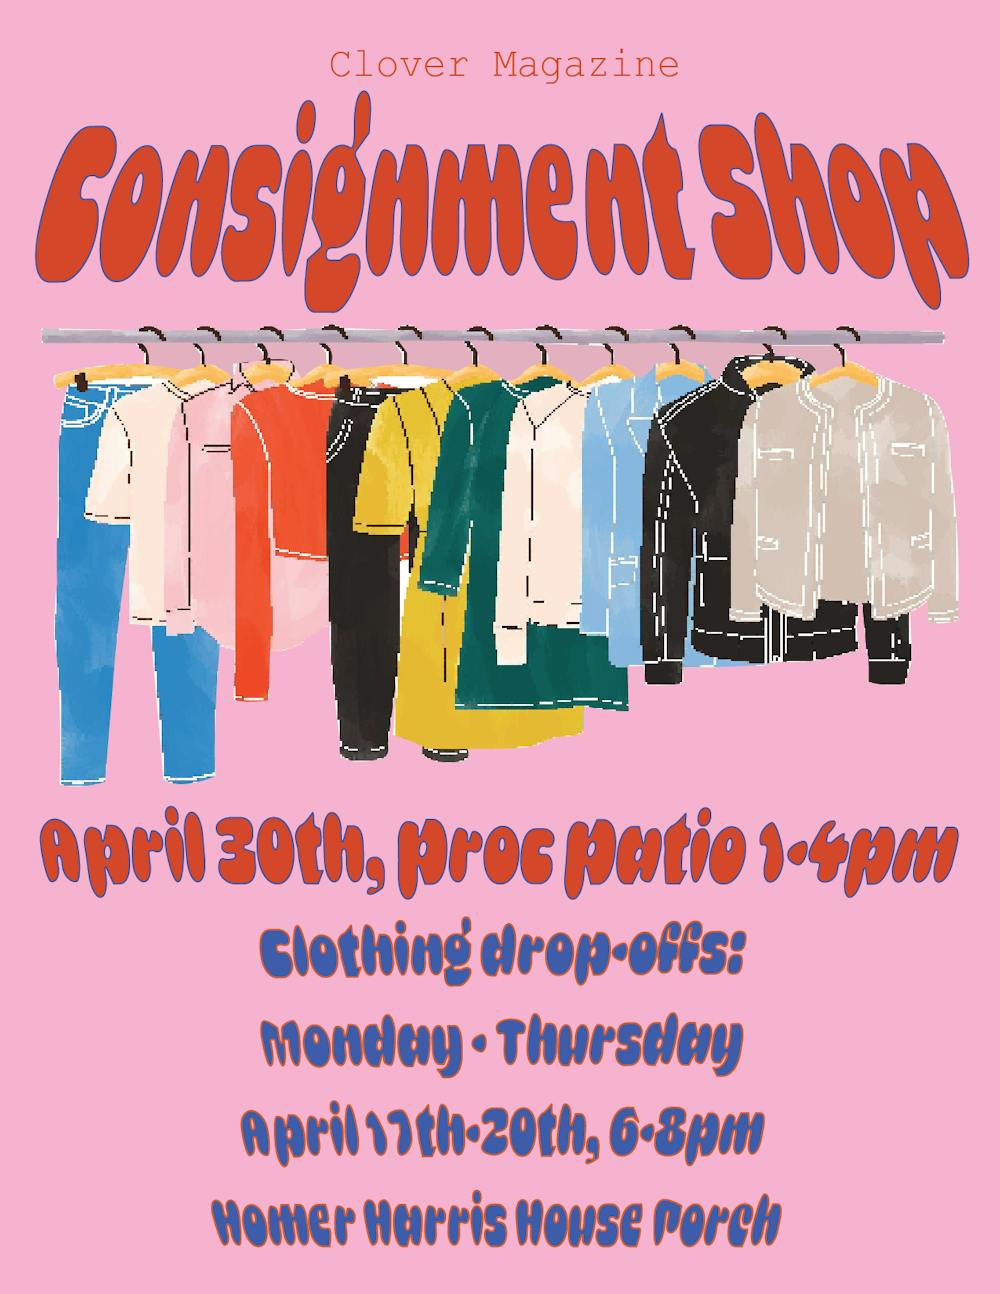 Consignment shop poster.